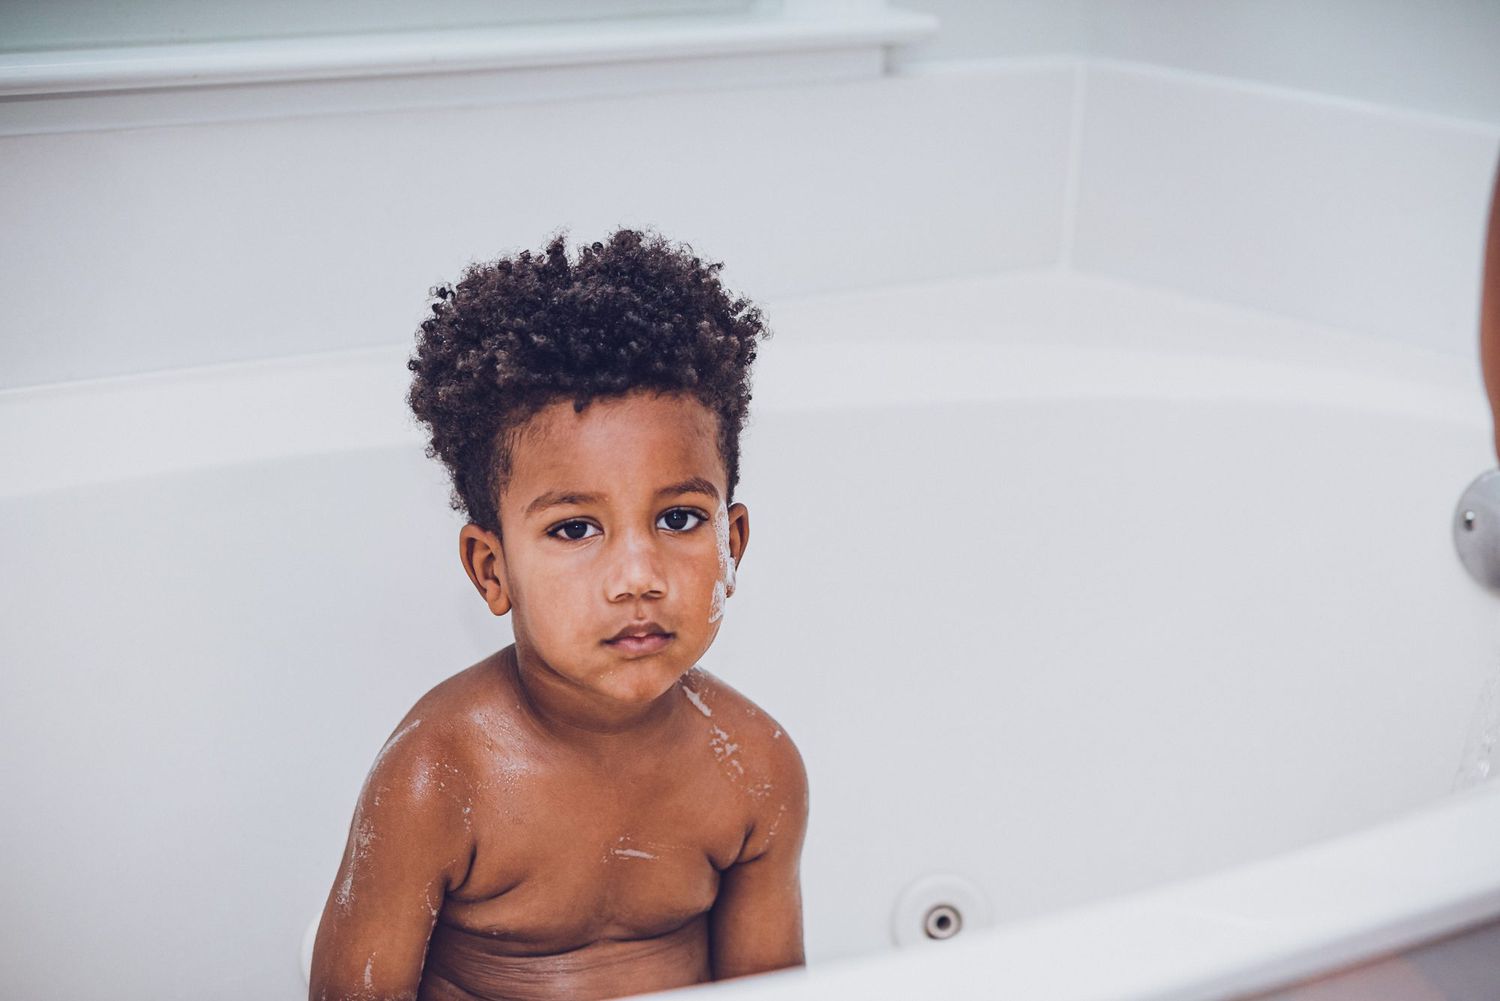 An image of Coleman in the bath tub during wash day.